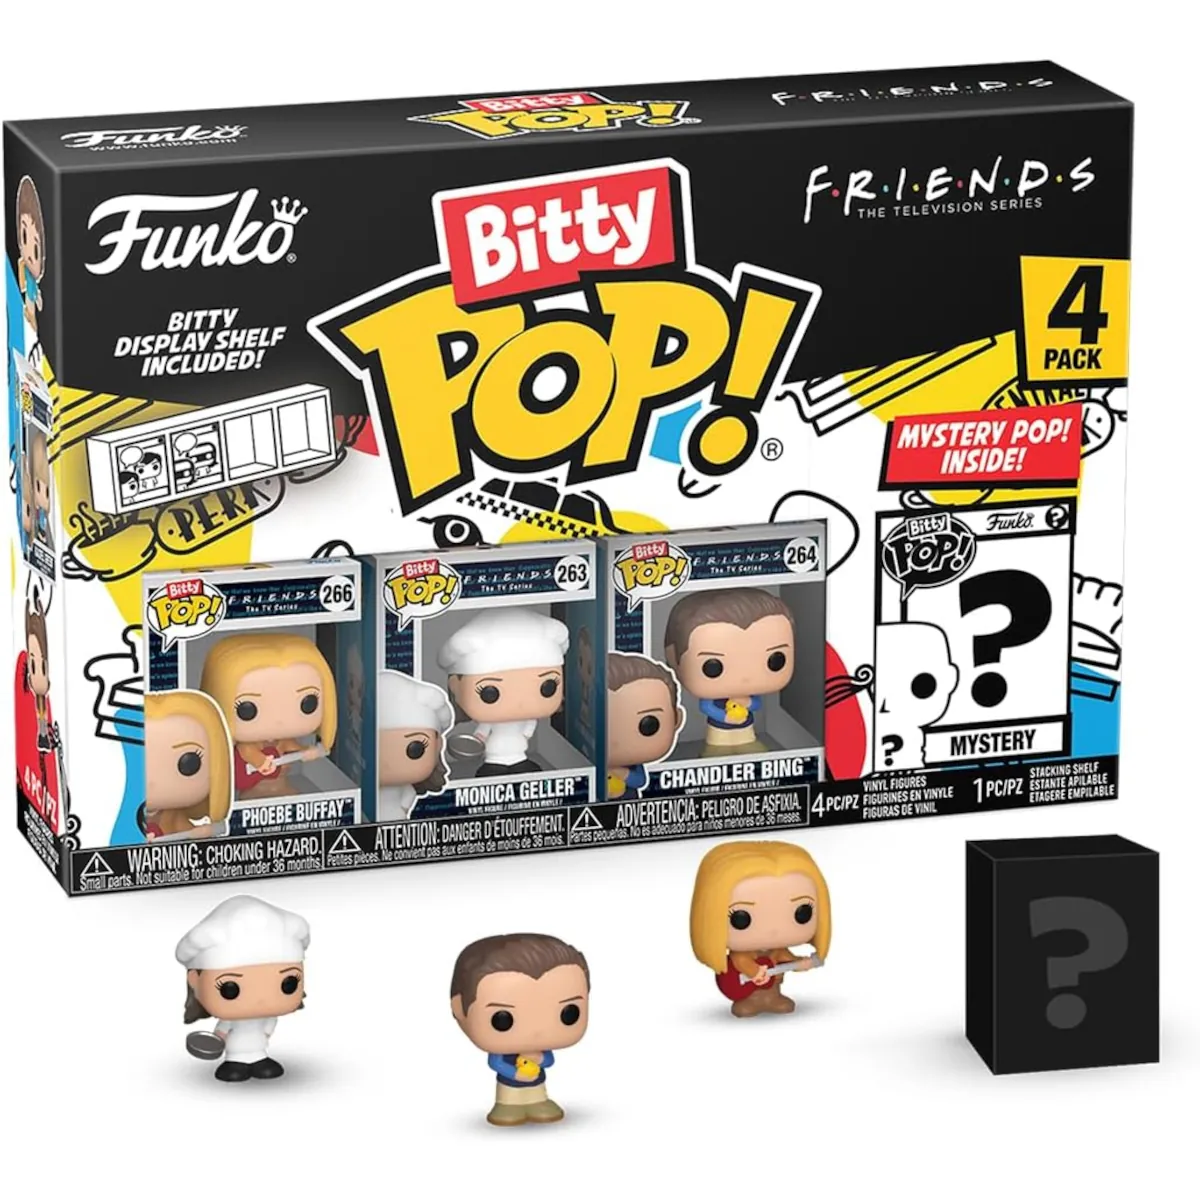 FK73051 Funko Bitty Pop! Television - Friends - Collectable Vinyl Figures (4-Pack)